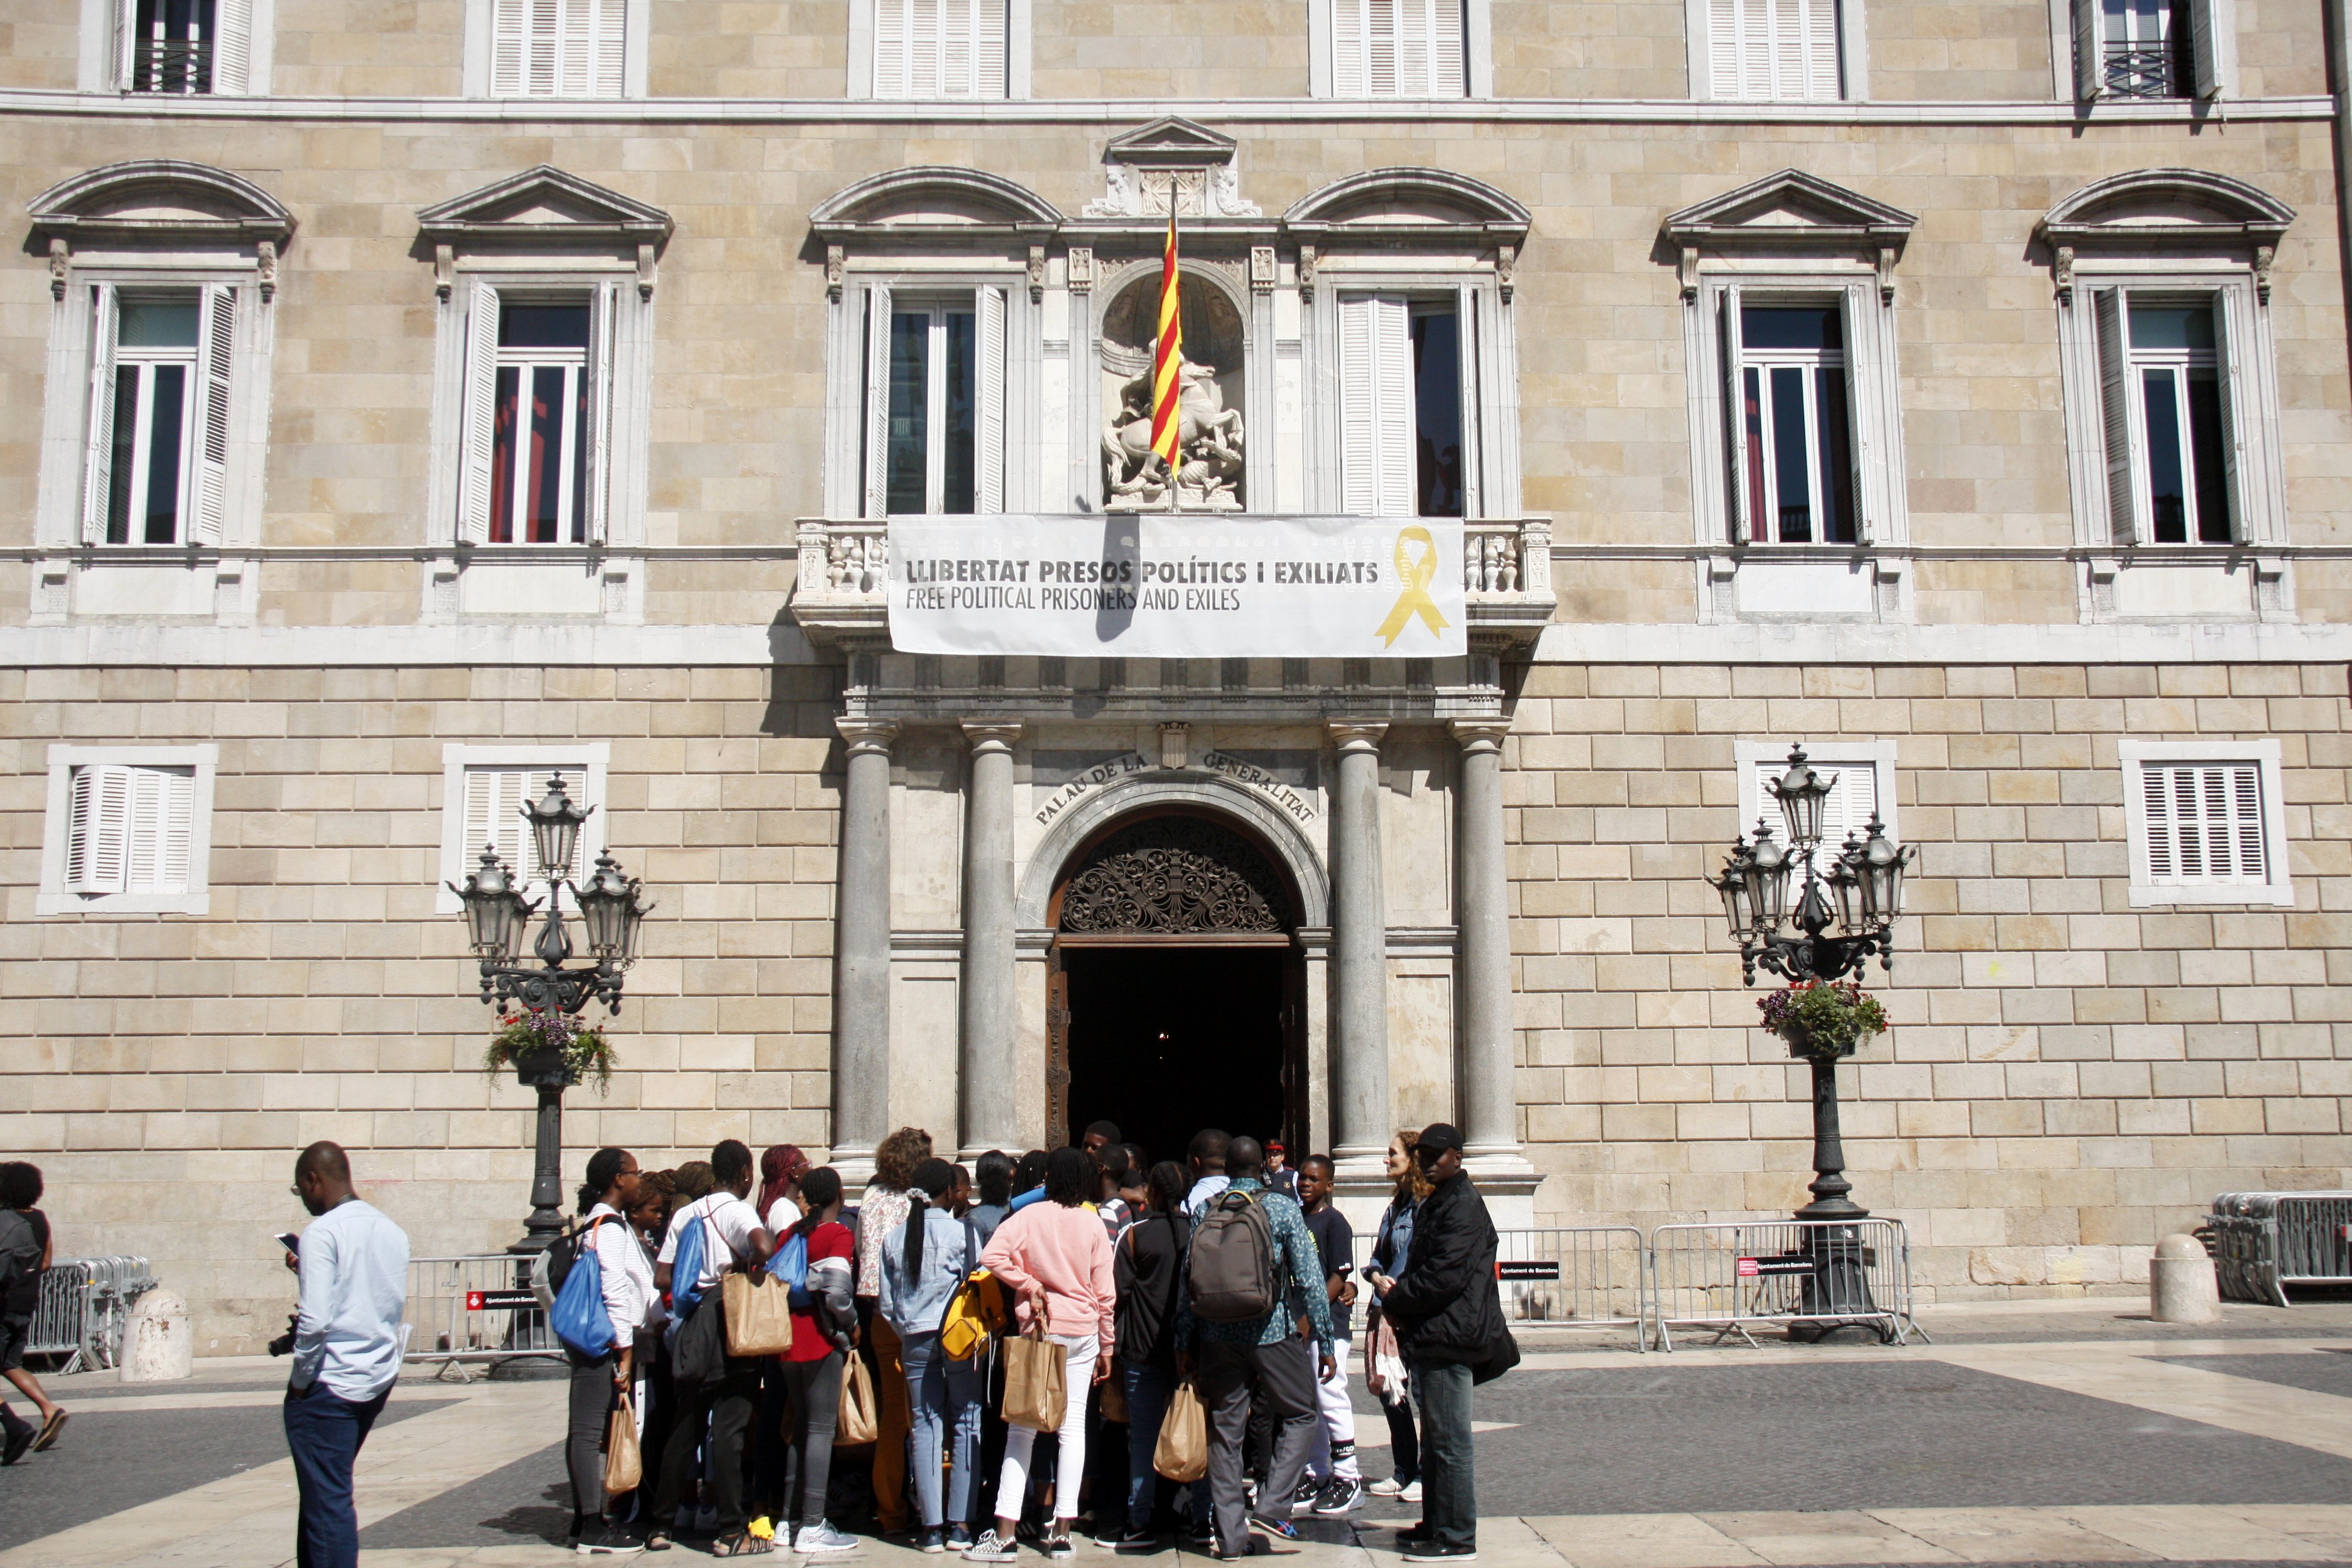 Banner for release of imprisoned Catalan politicians returns to government palace